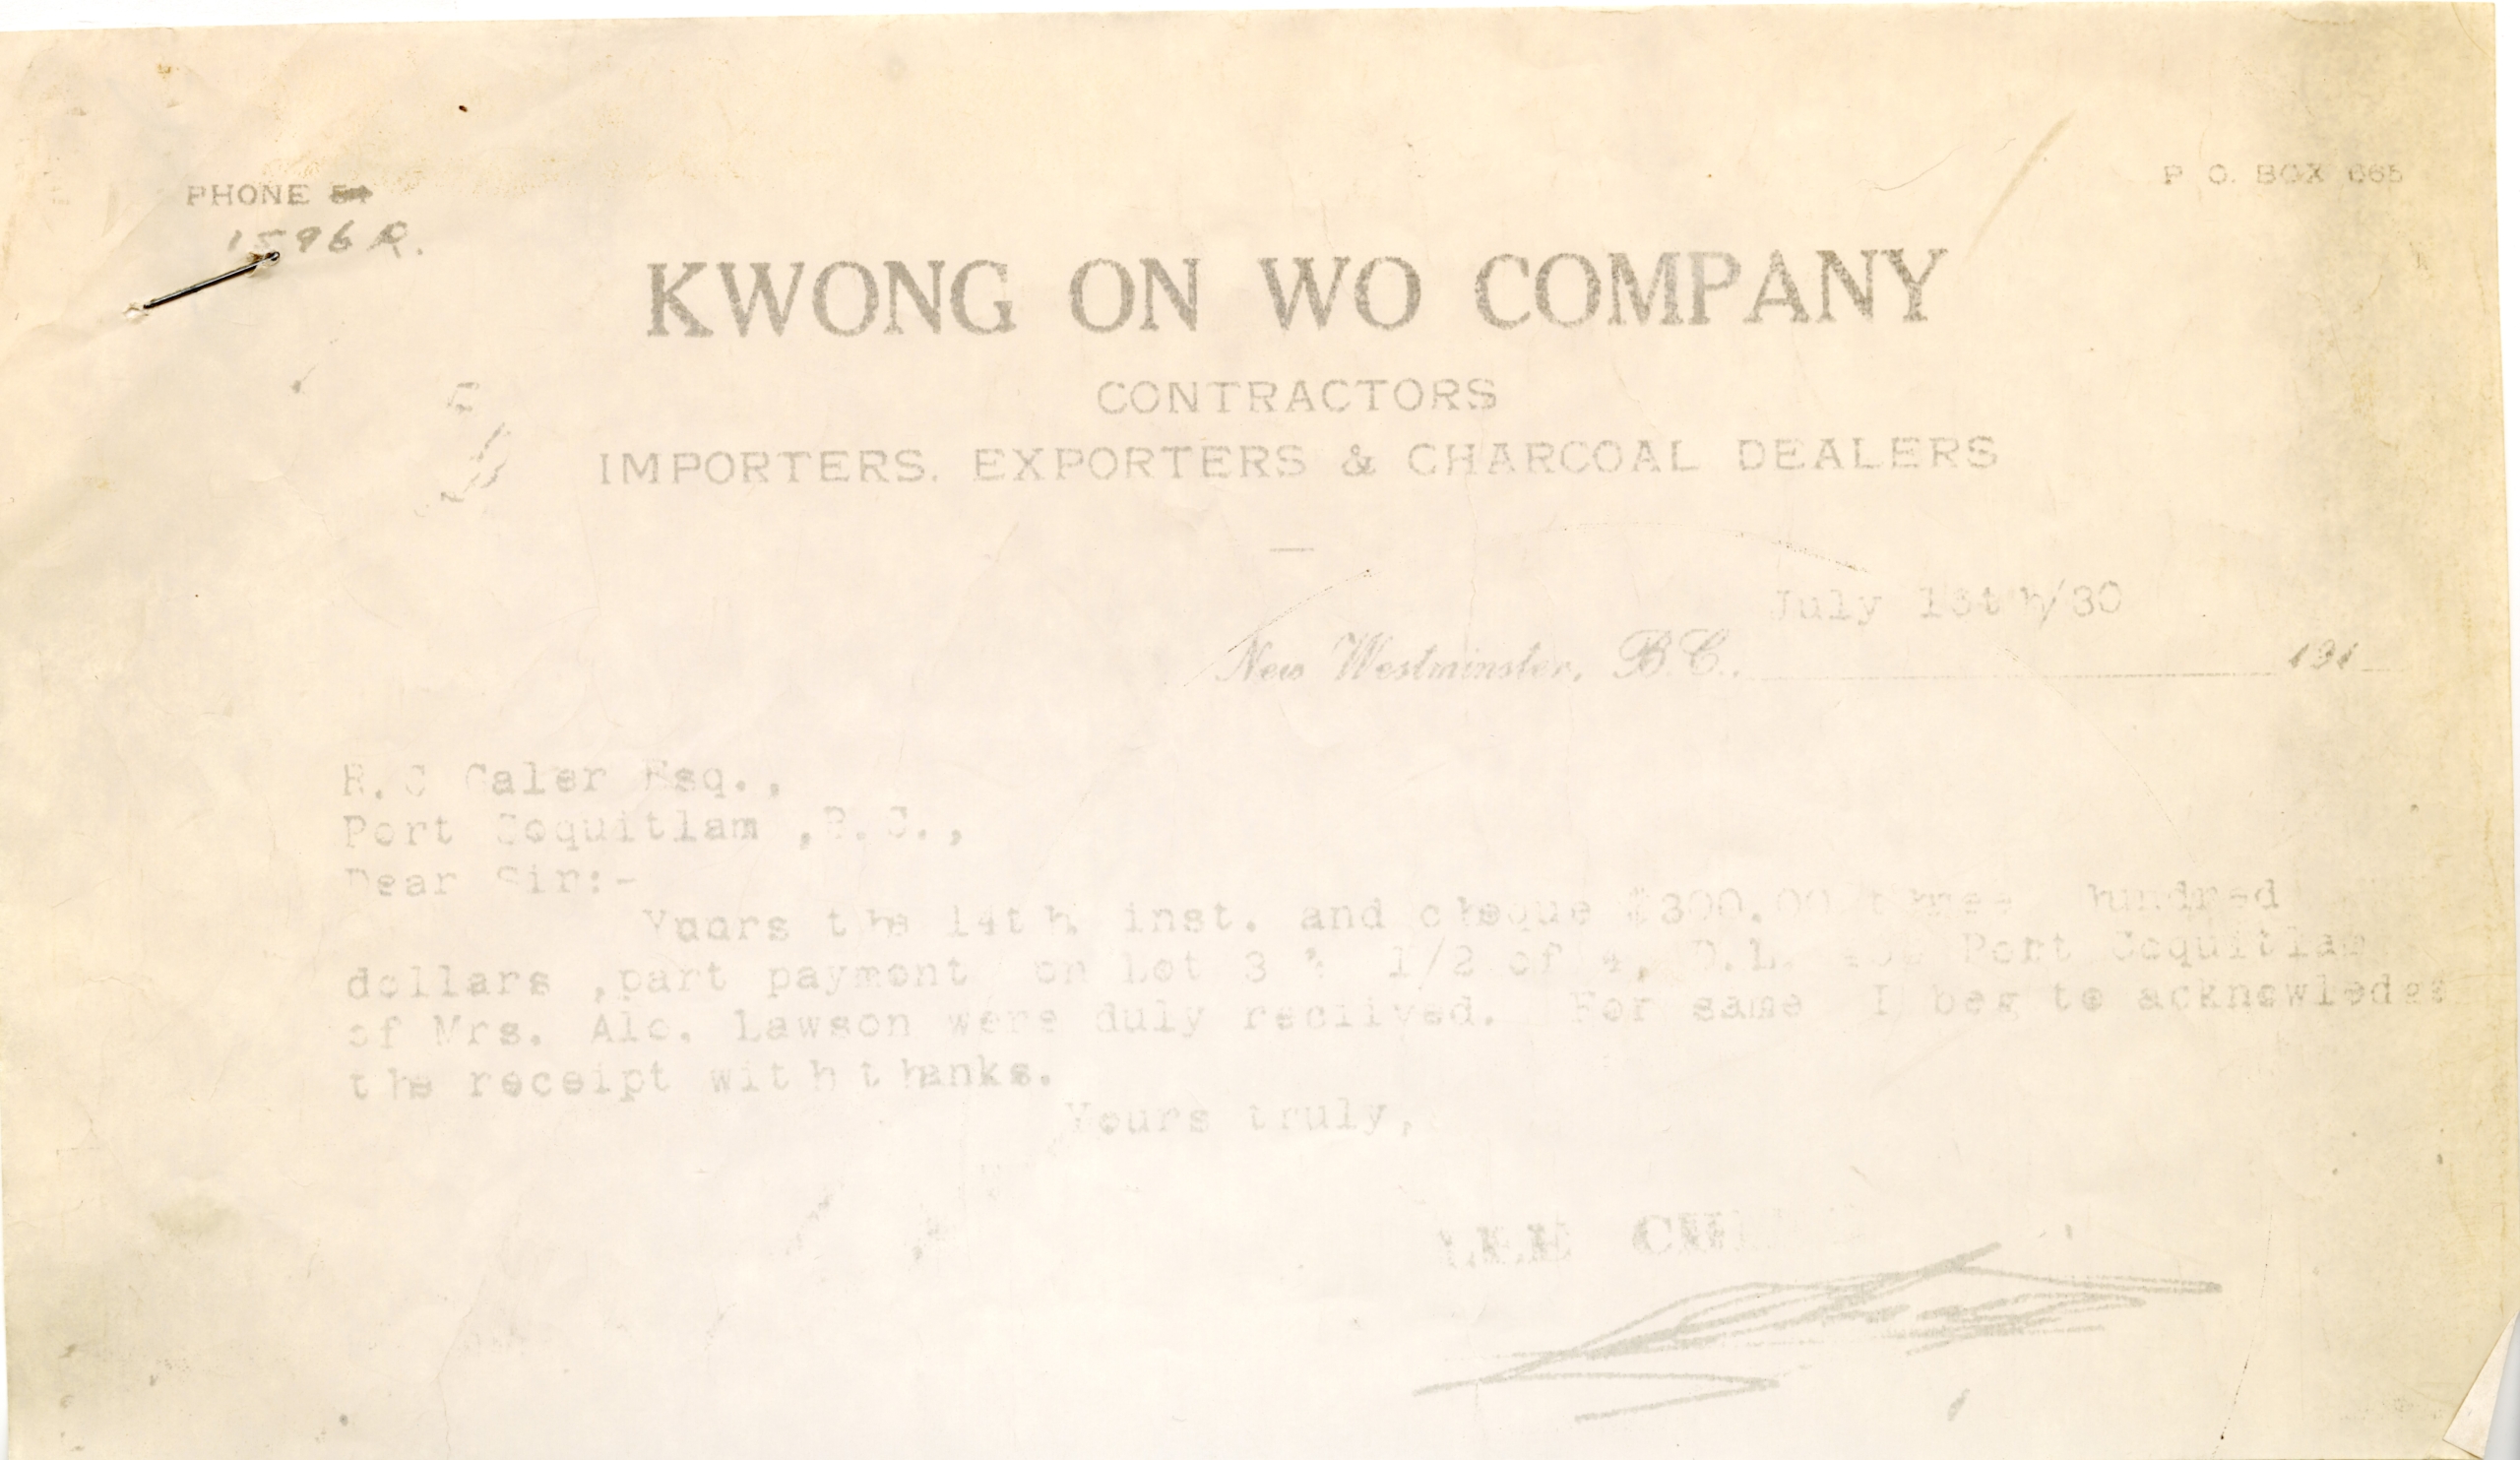 A scanned receipt for land sale with faded black print and "Kwong On Wo" in large font